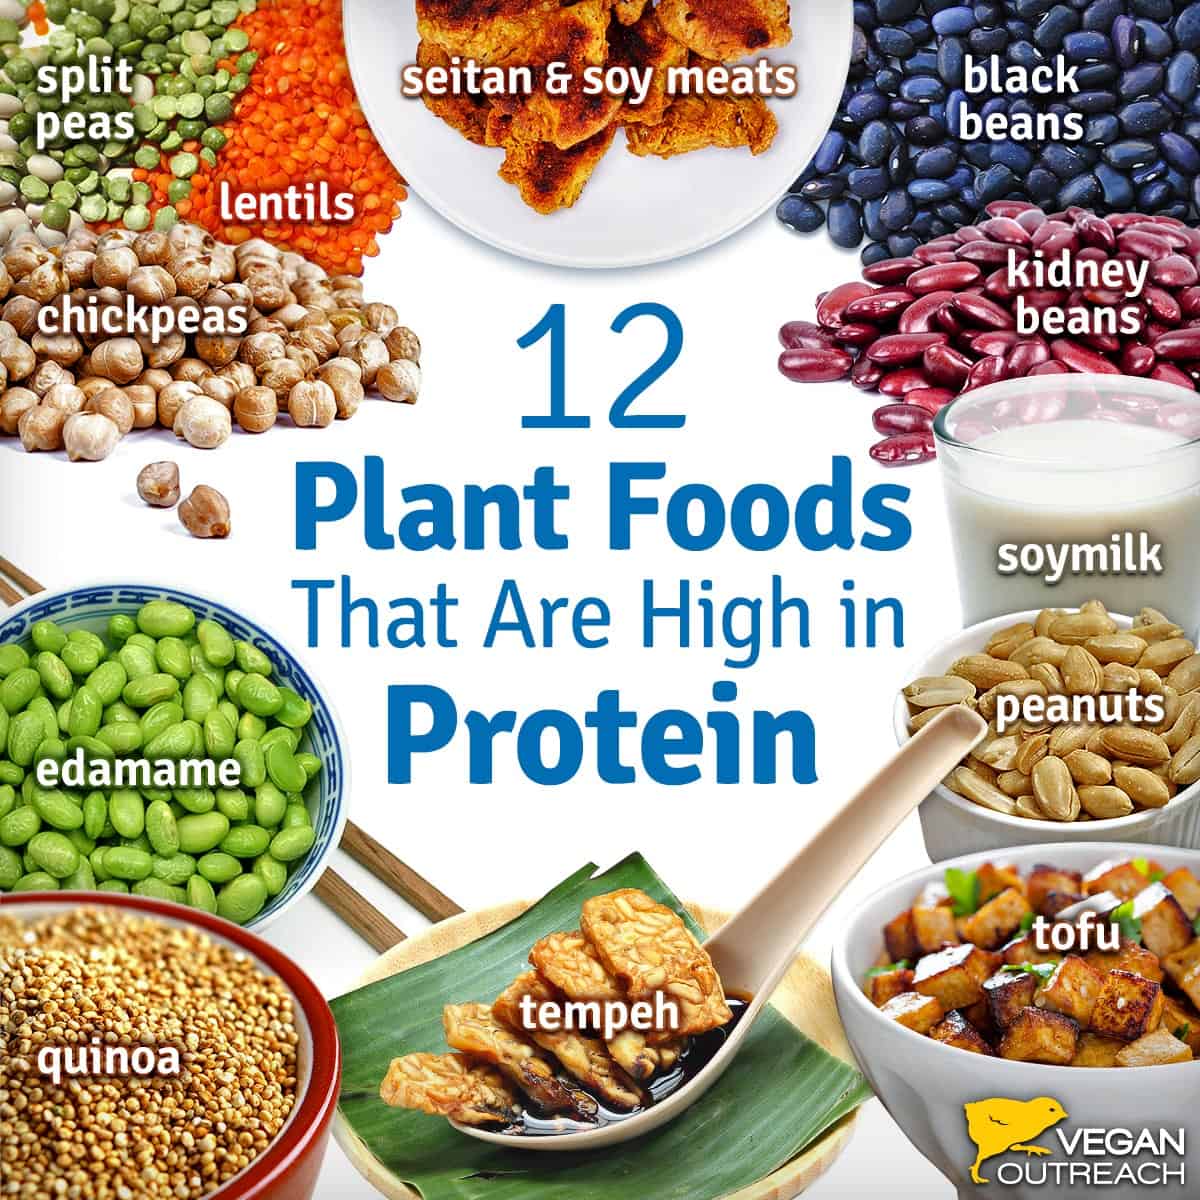 Plant foods that are high in protein like beans, lentils, peas, soy, tofu, tempeh, and beyond.